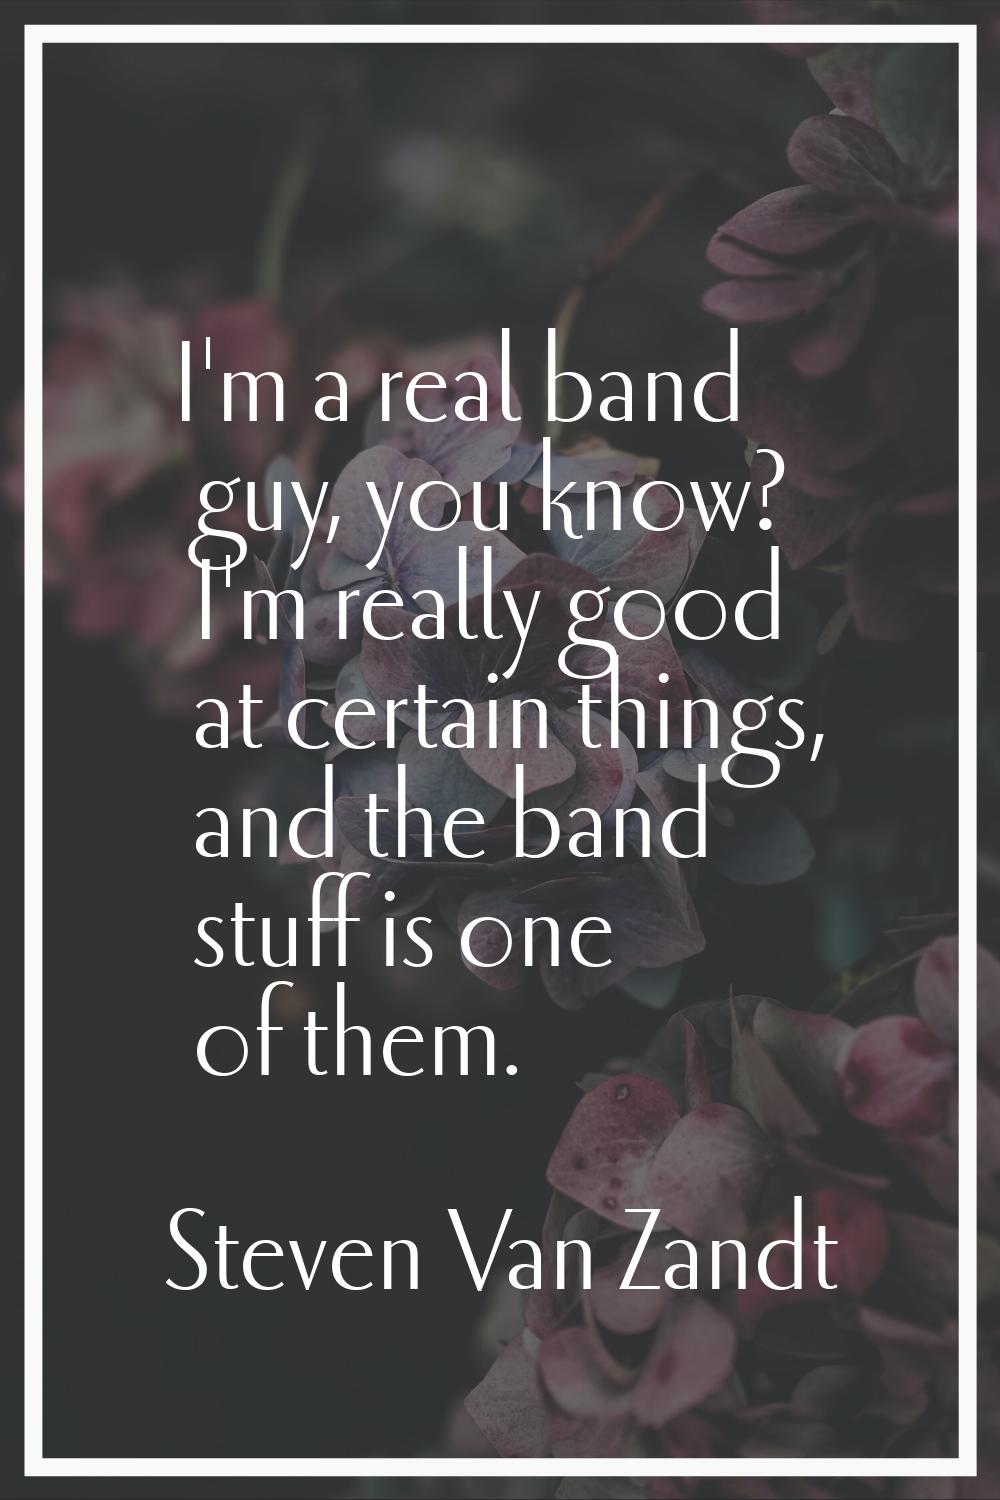 I'm a real band guy, you know? I'm really good at certain things, and the band stuff is one of them